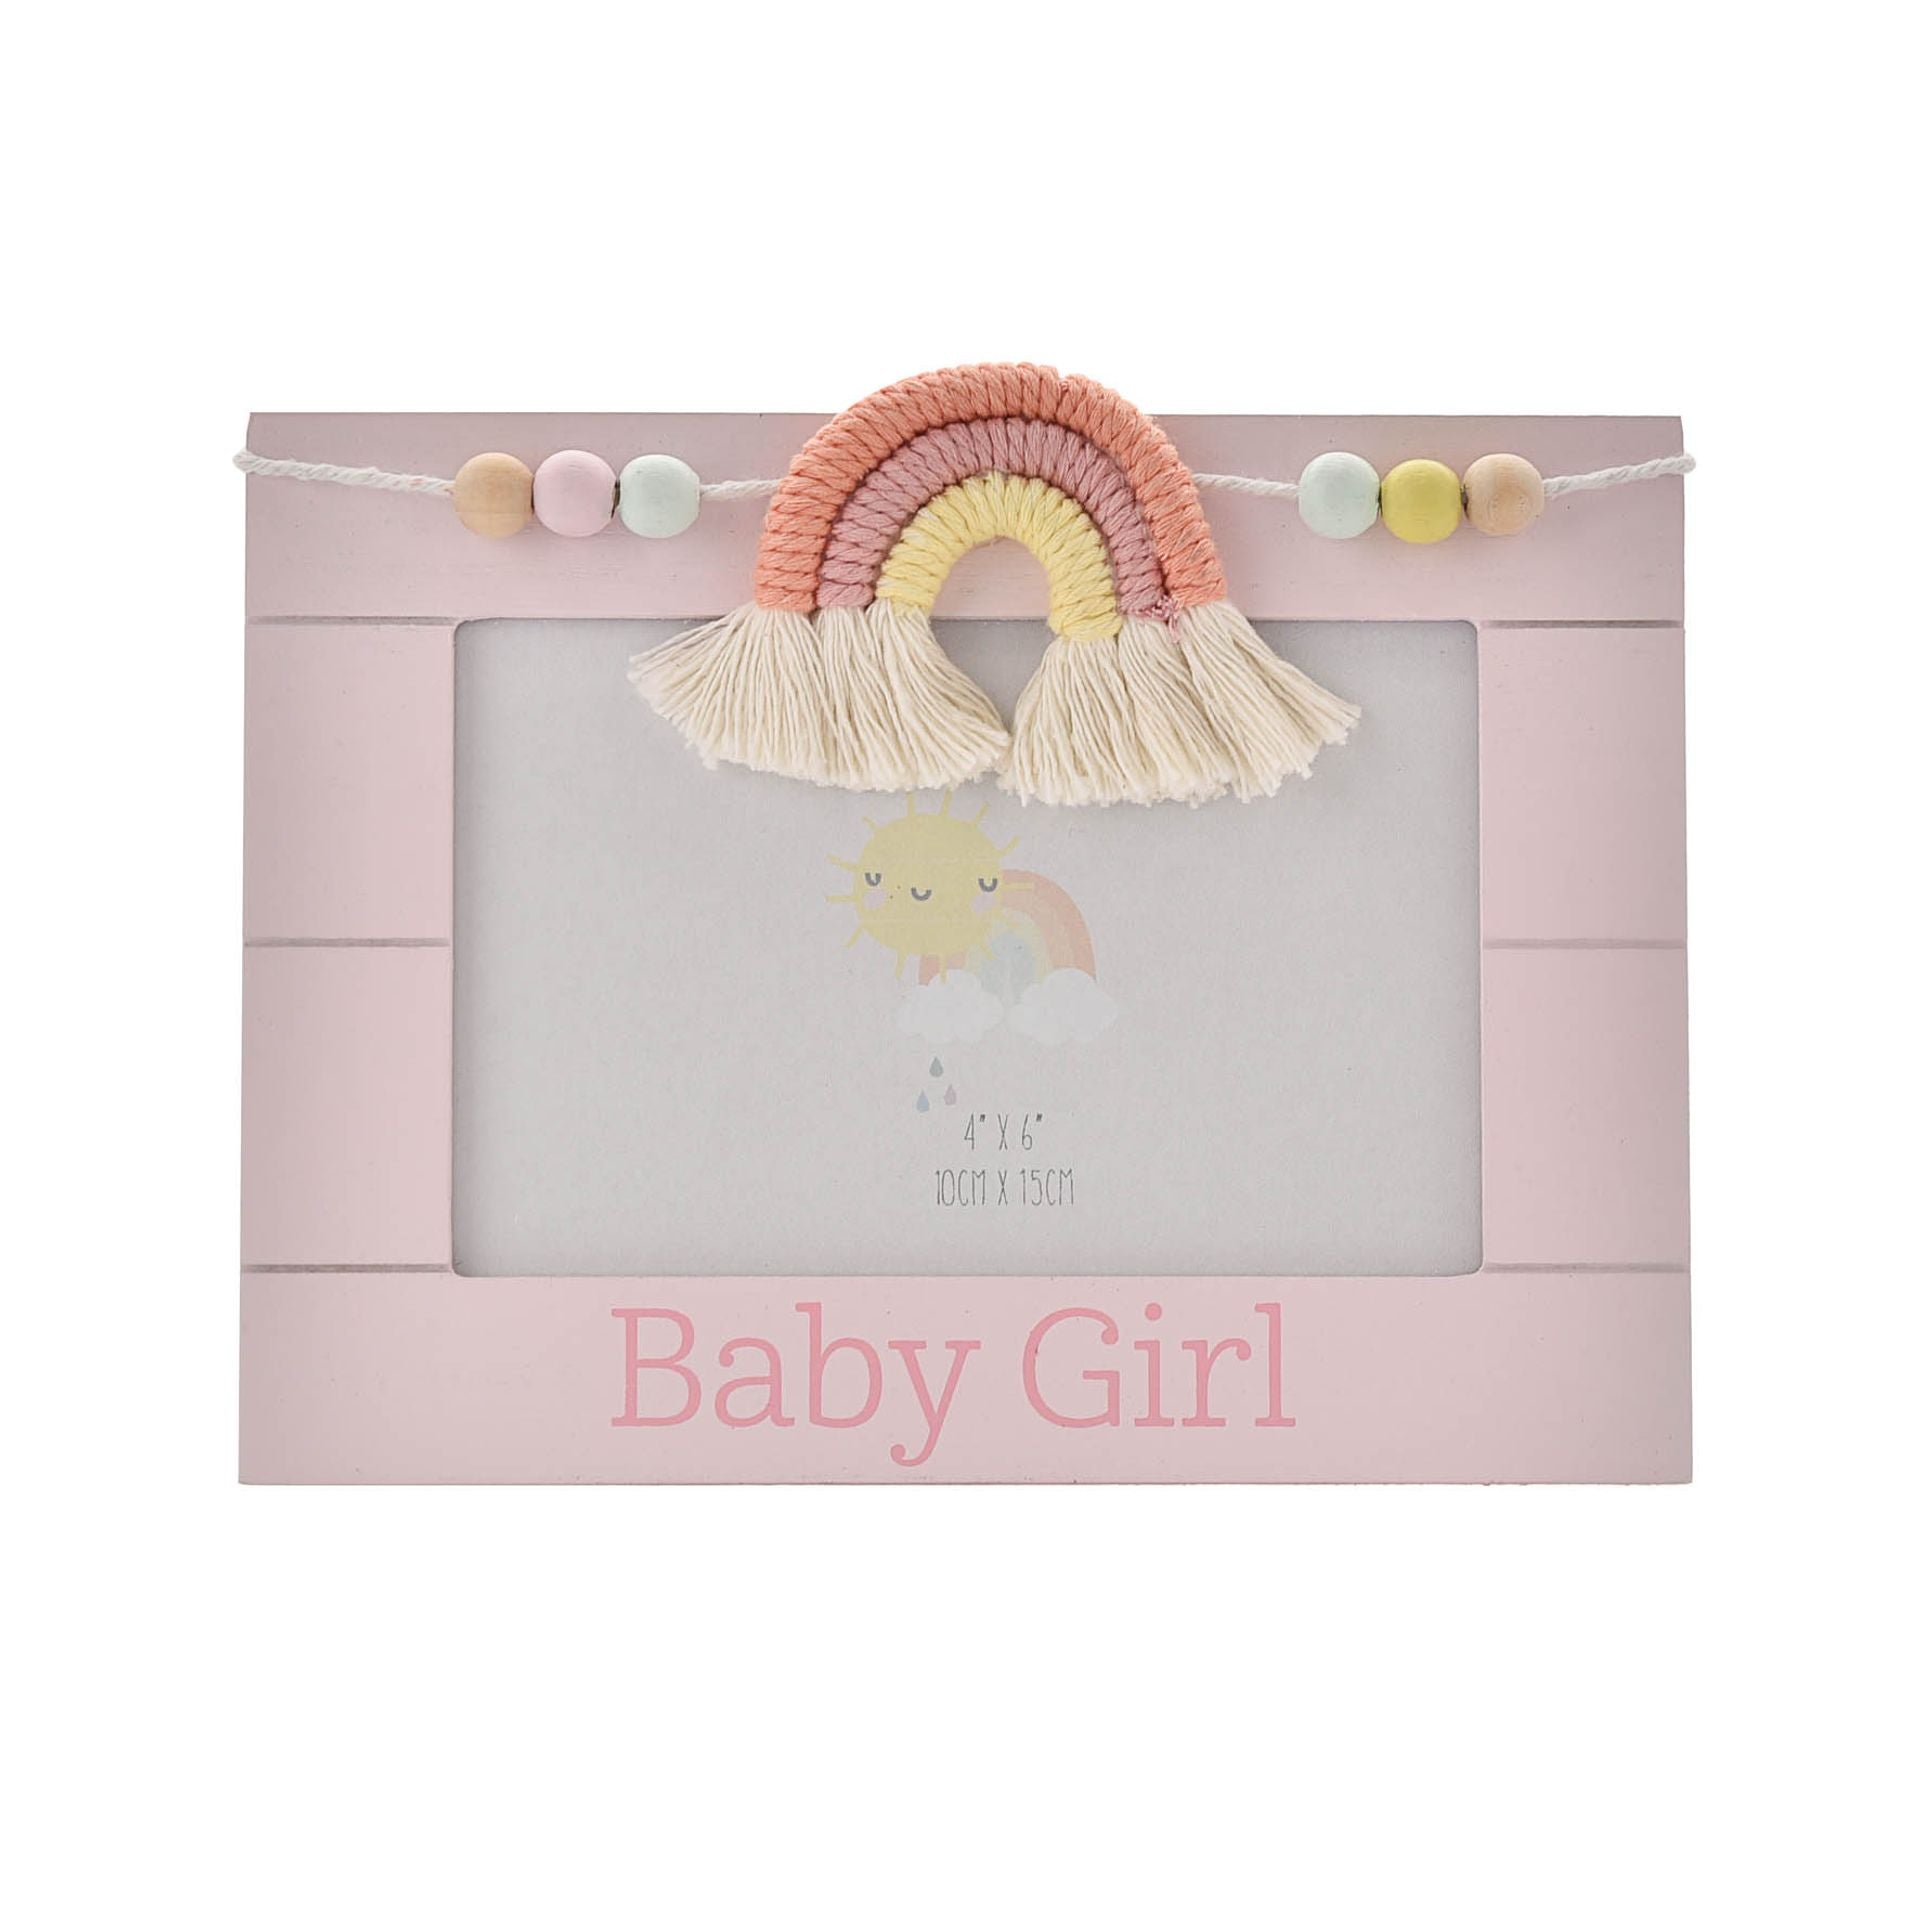 Free standing wooden photo picture frame in pink with a macrame rainbow and 'Baby Girl' Sentiment wording 